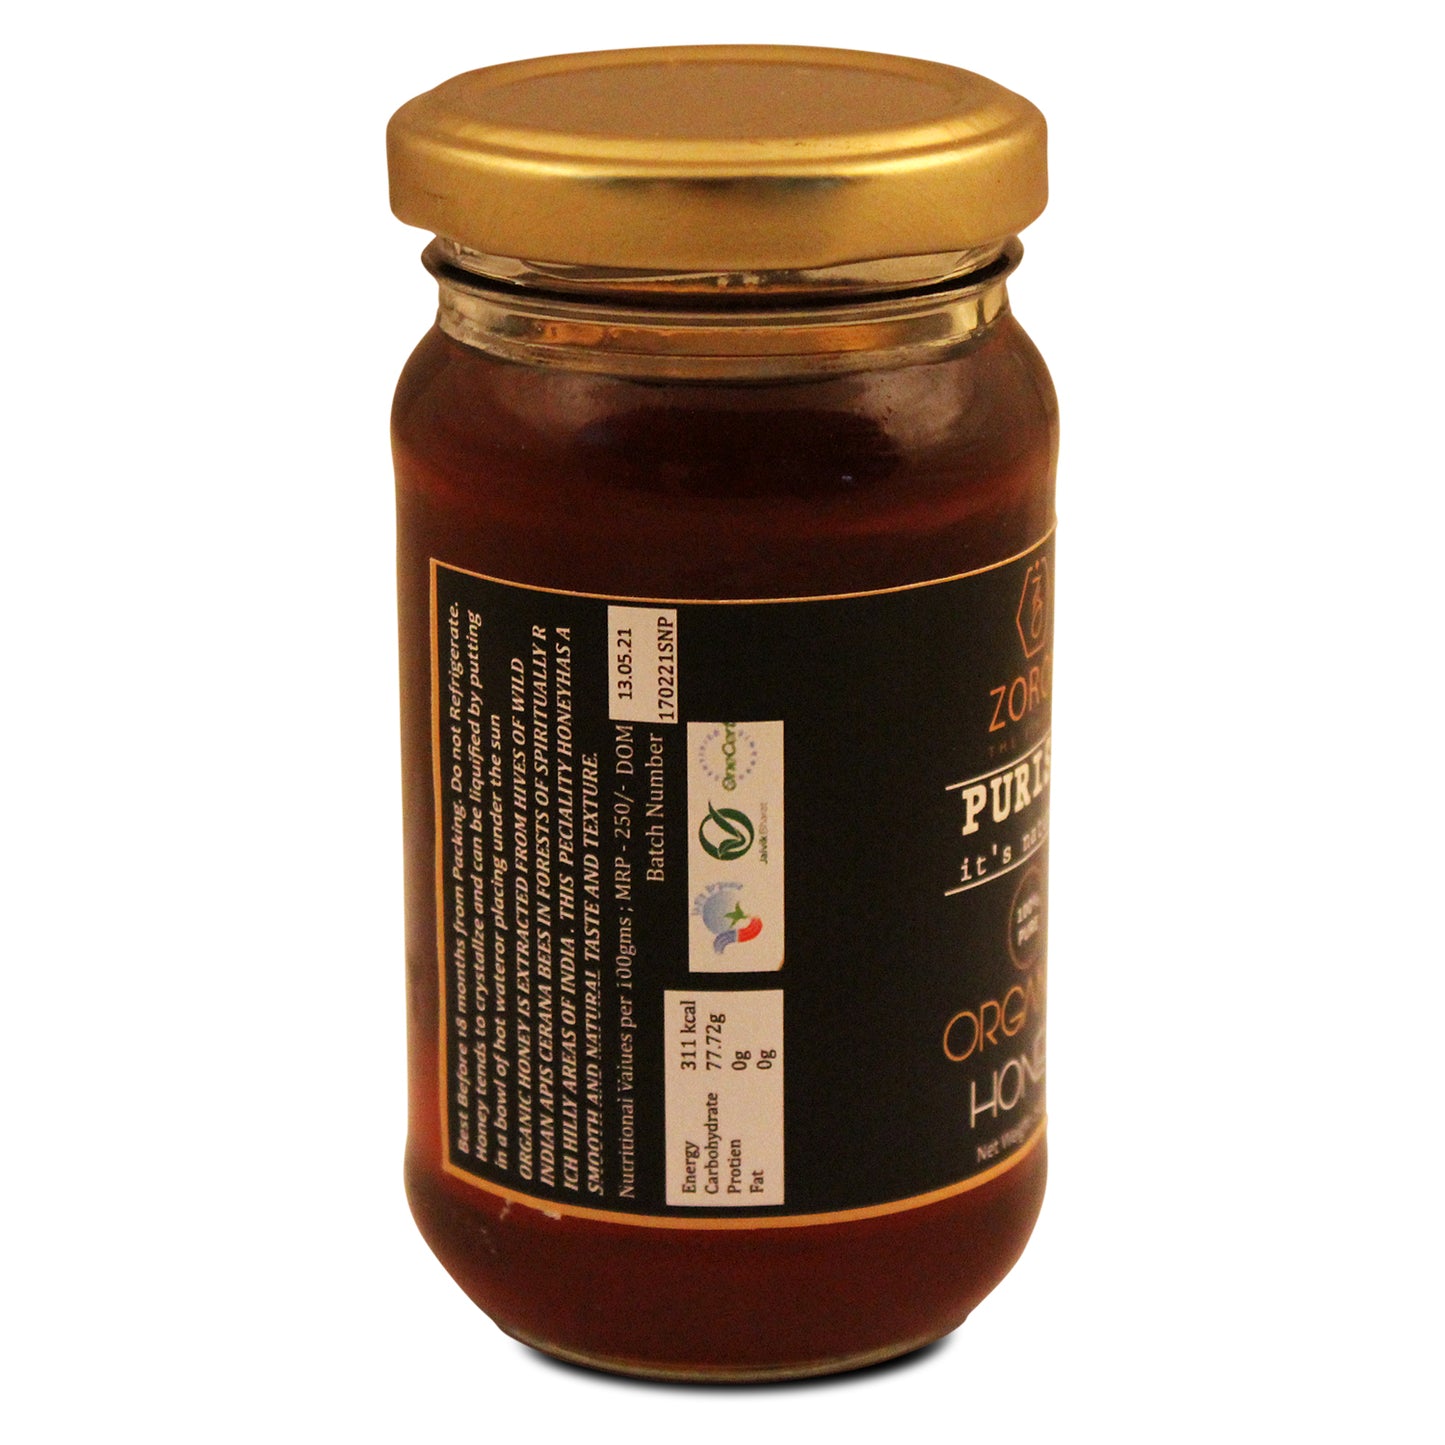 ZOROY THE FINESSE 100% Pure Honey Organic Honey cultivated from Himalyas Wild forest Honey | Best Honey for Family | Natural Honey | No Sugar adulteration | 250 Grams